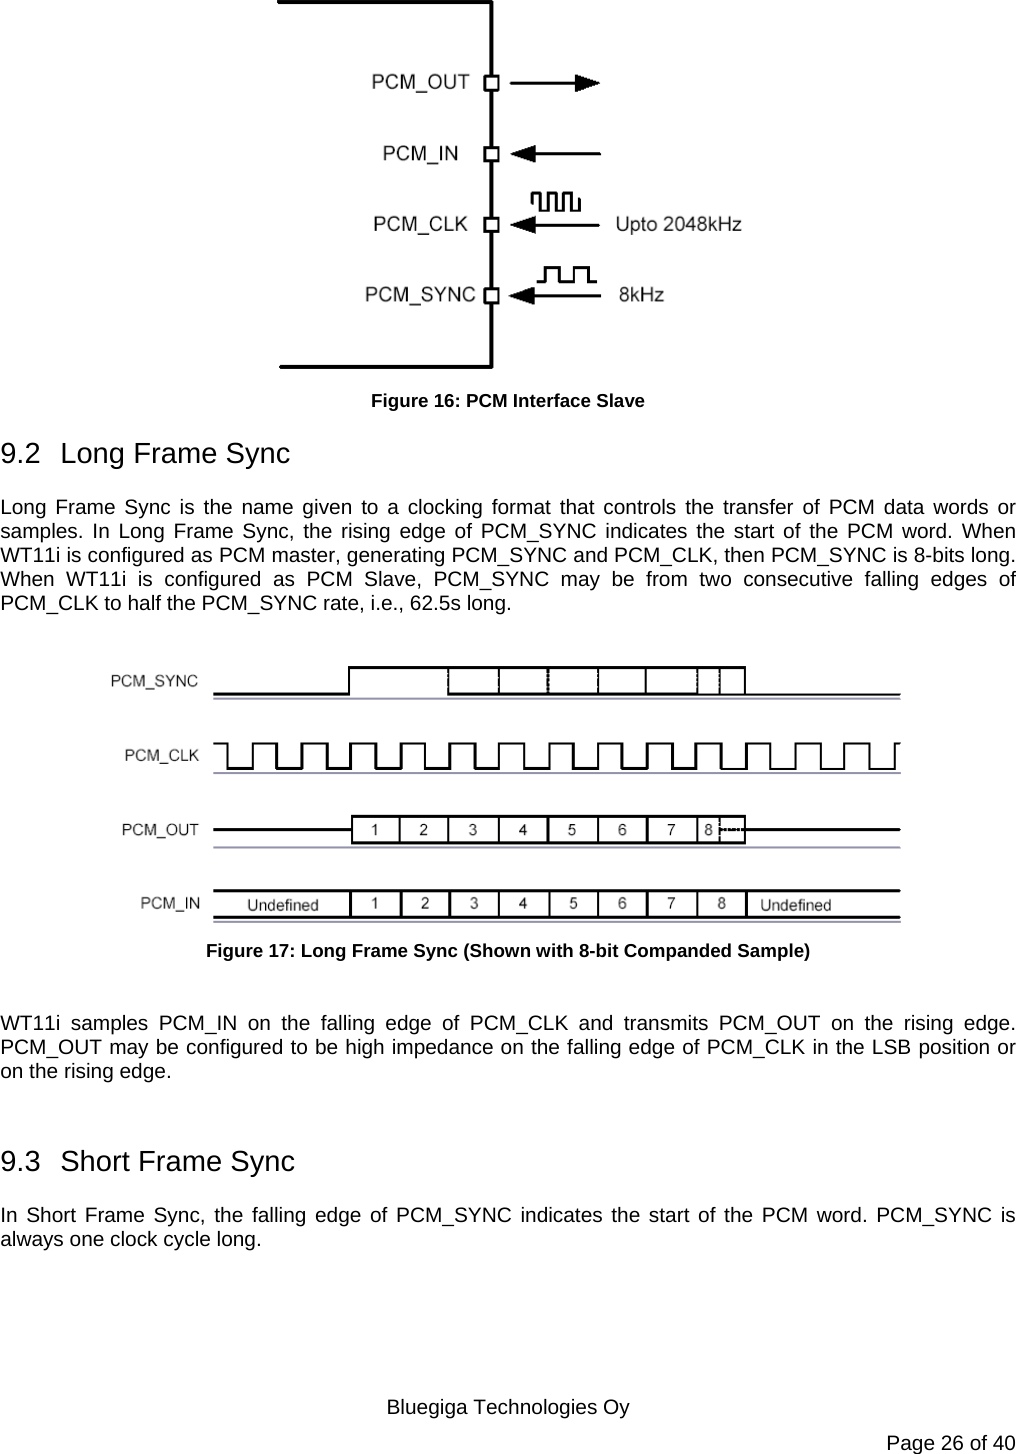   Bluegiga Technologies Oy Page 26 of 40  Figure 16: PCM Interface Slave 9.2  Long Frame Sync Long Frame Sync is the name given to a clocking format that controls the transfer of PCM data words or samples. In Long Frame Sync, the rising edge of PCM_SYNC indicates the start of the PCM word. When WT11i is configured as PCM master, generating PCM_SYNC and PCM_CLK, then PCM_SYNC is 8-bits long. When WT11i is configured as PCM Slave, PCM_SYNC may be from two consecutive falling edges of PCM_CLK to half the PCM_SYNC rate, i.e., 62.5s long.   Figure 17: Long Frame Sync (Shown with 8-bit Companded Sample)  WT11i samples PCM_IN on the falling edge of PCM_CLK and transmits PCM_OUT on the rising edge. PCM_OUT may be configured to be high impedance on the falling edge of PCM_CLK in the LSB position or on the rising edge.  9.3  Short Frame Sync In Short Frame Sync, the falling edge of PCM_SYNC indicates the start of the PCM word. PCM_SYNC is always one clock cycle long. 